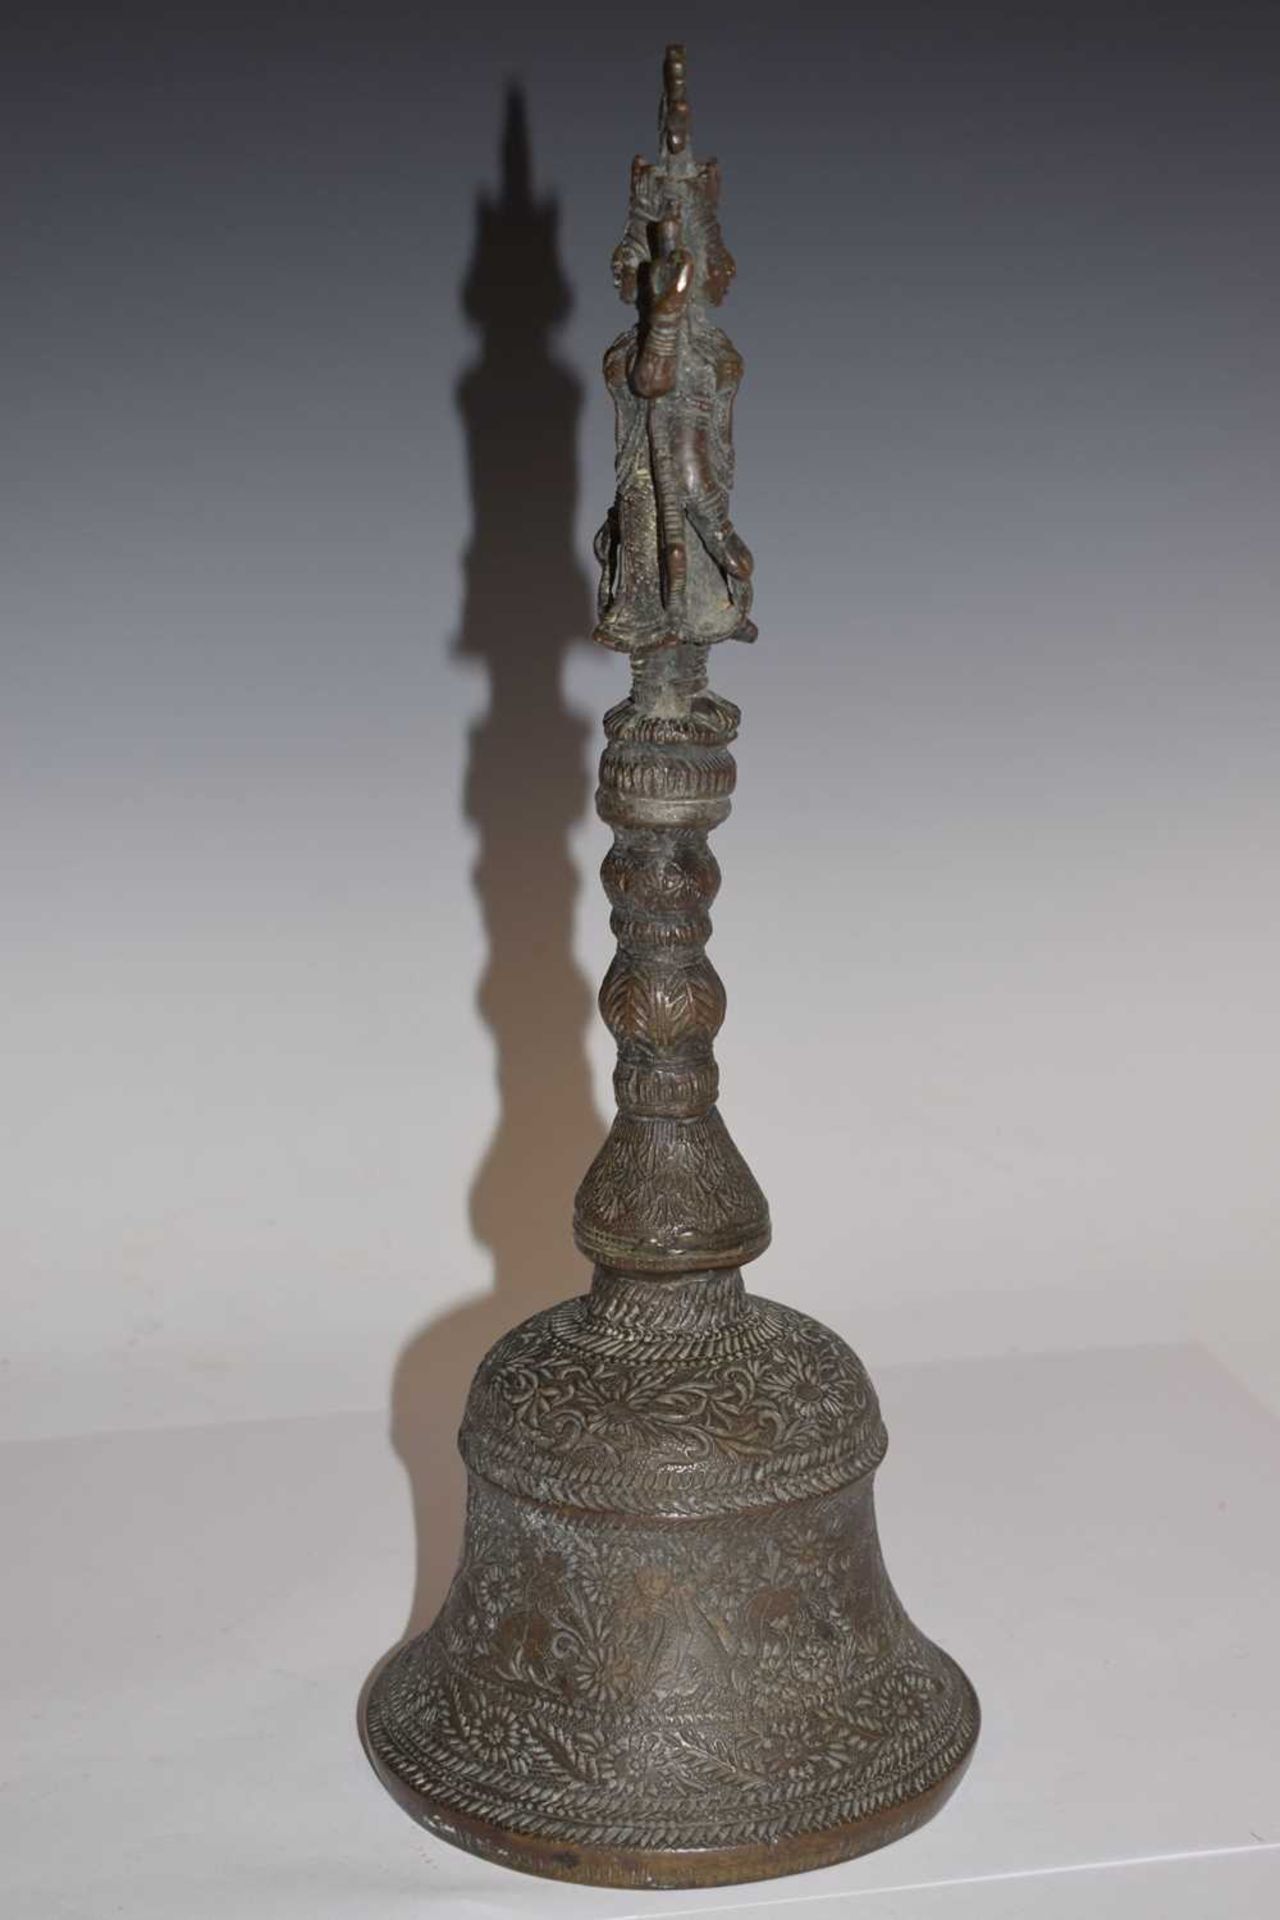 Large Indian cast bronze temple bell - Image 5 of 10